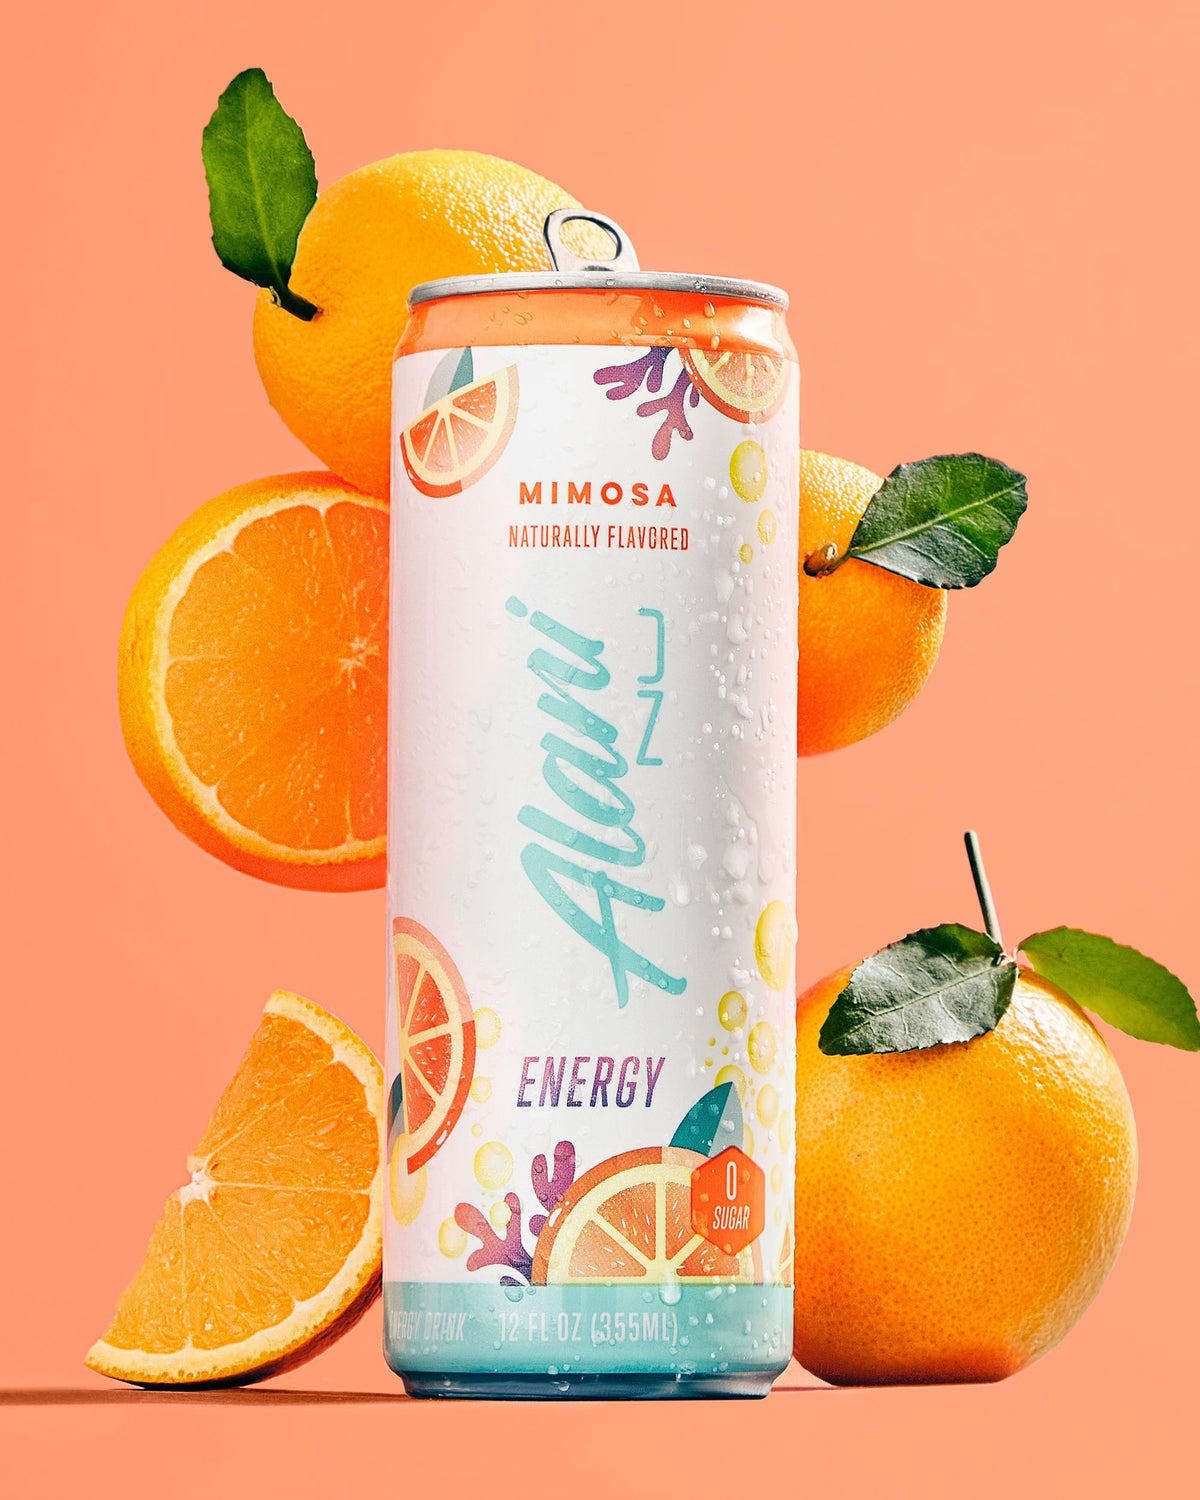 A 12 fl oz can of Alani Nu Mimosa energy drink surrounded by oranges.